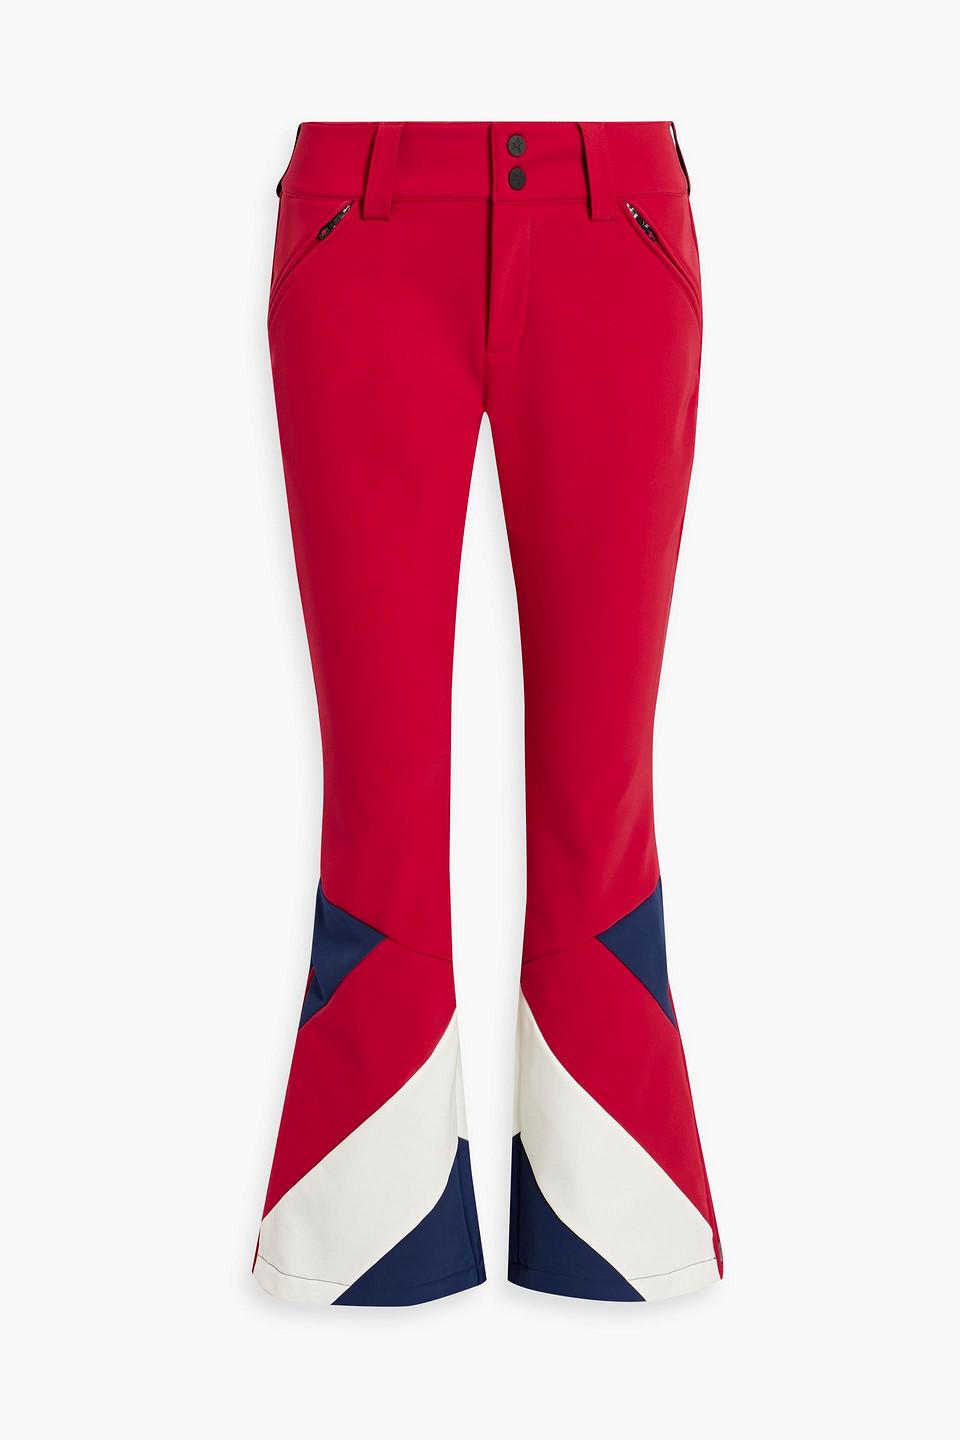 Perfect Moment Bootcut Striped Ski Pants in Red